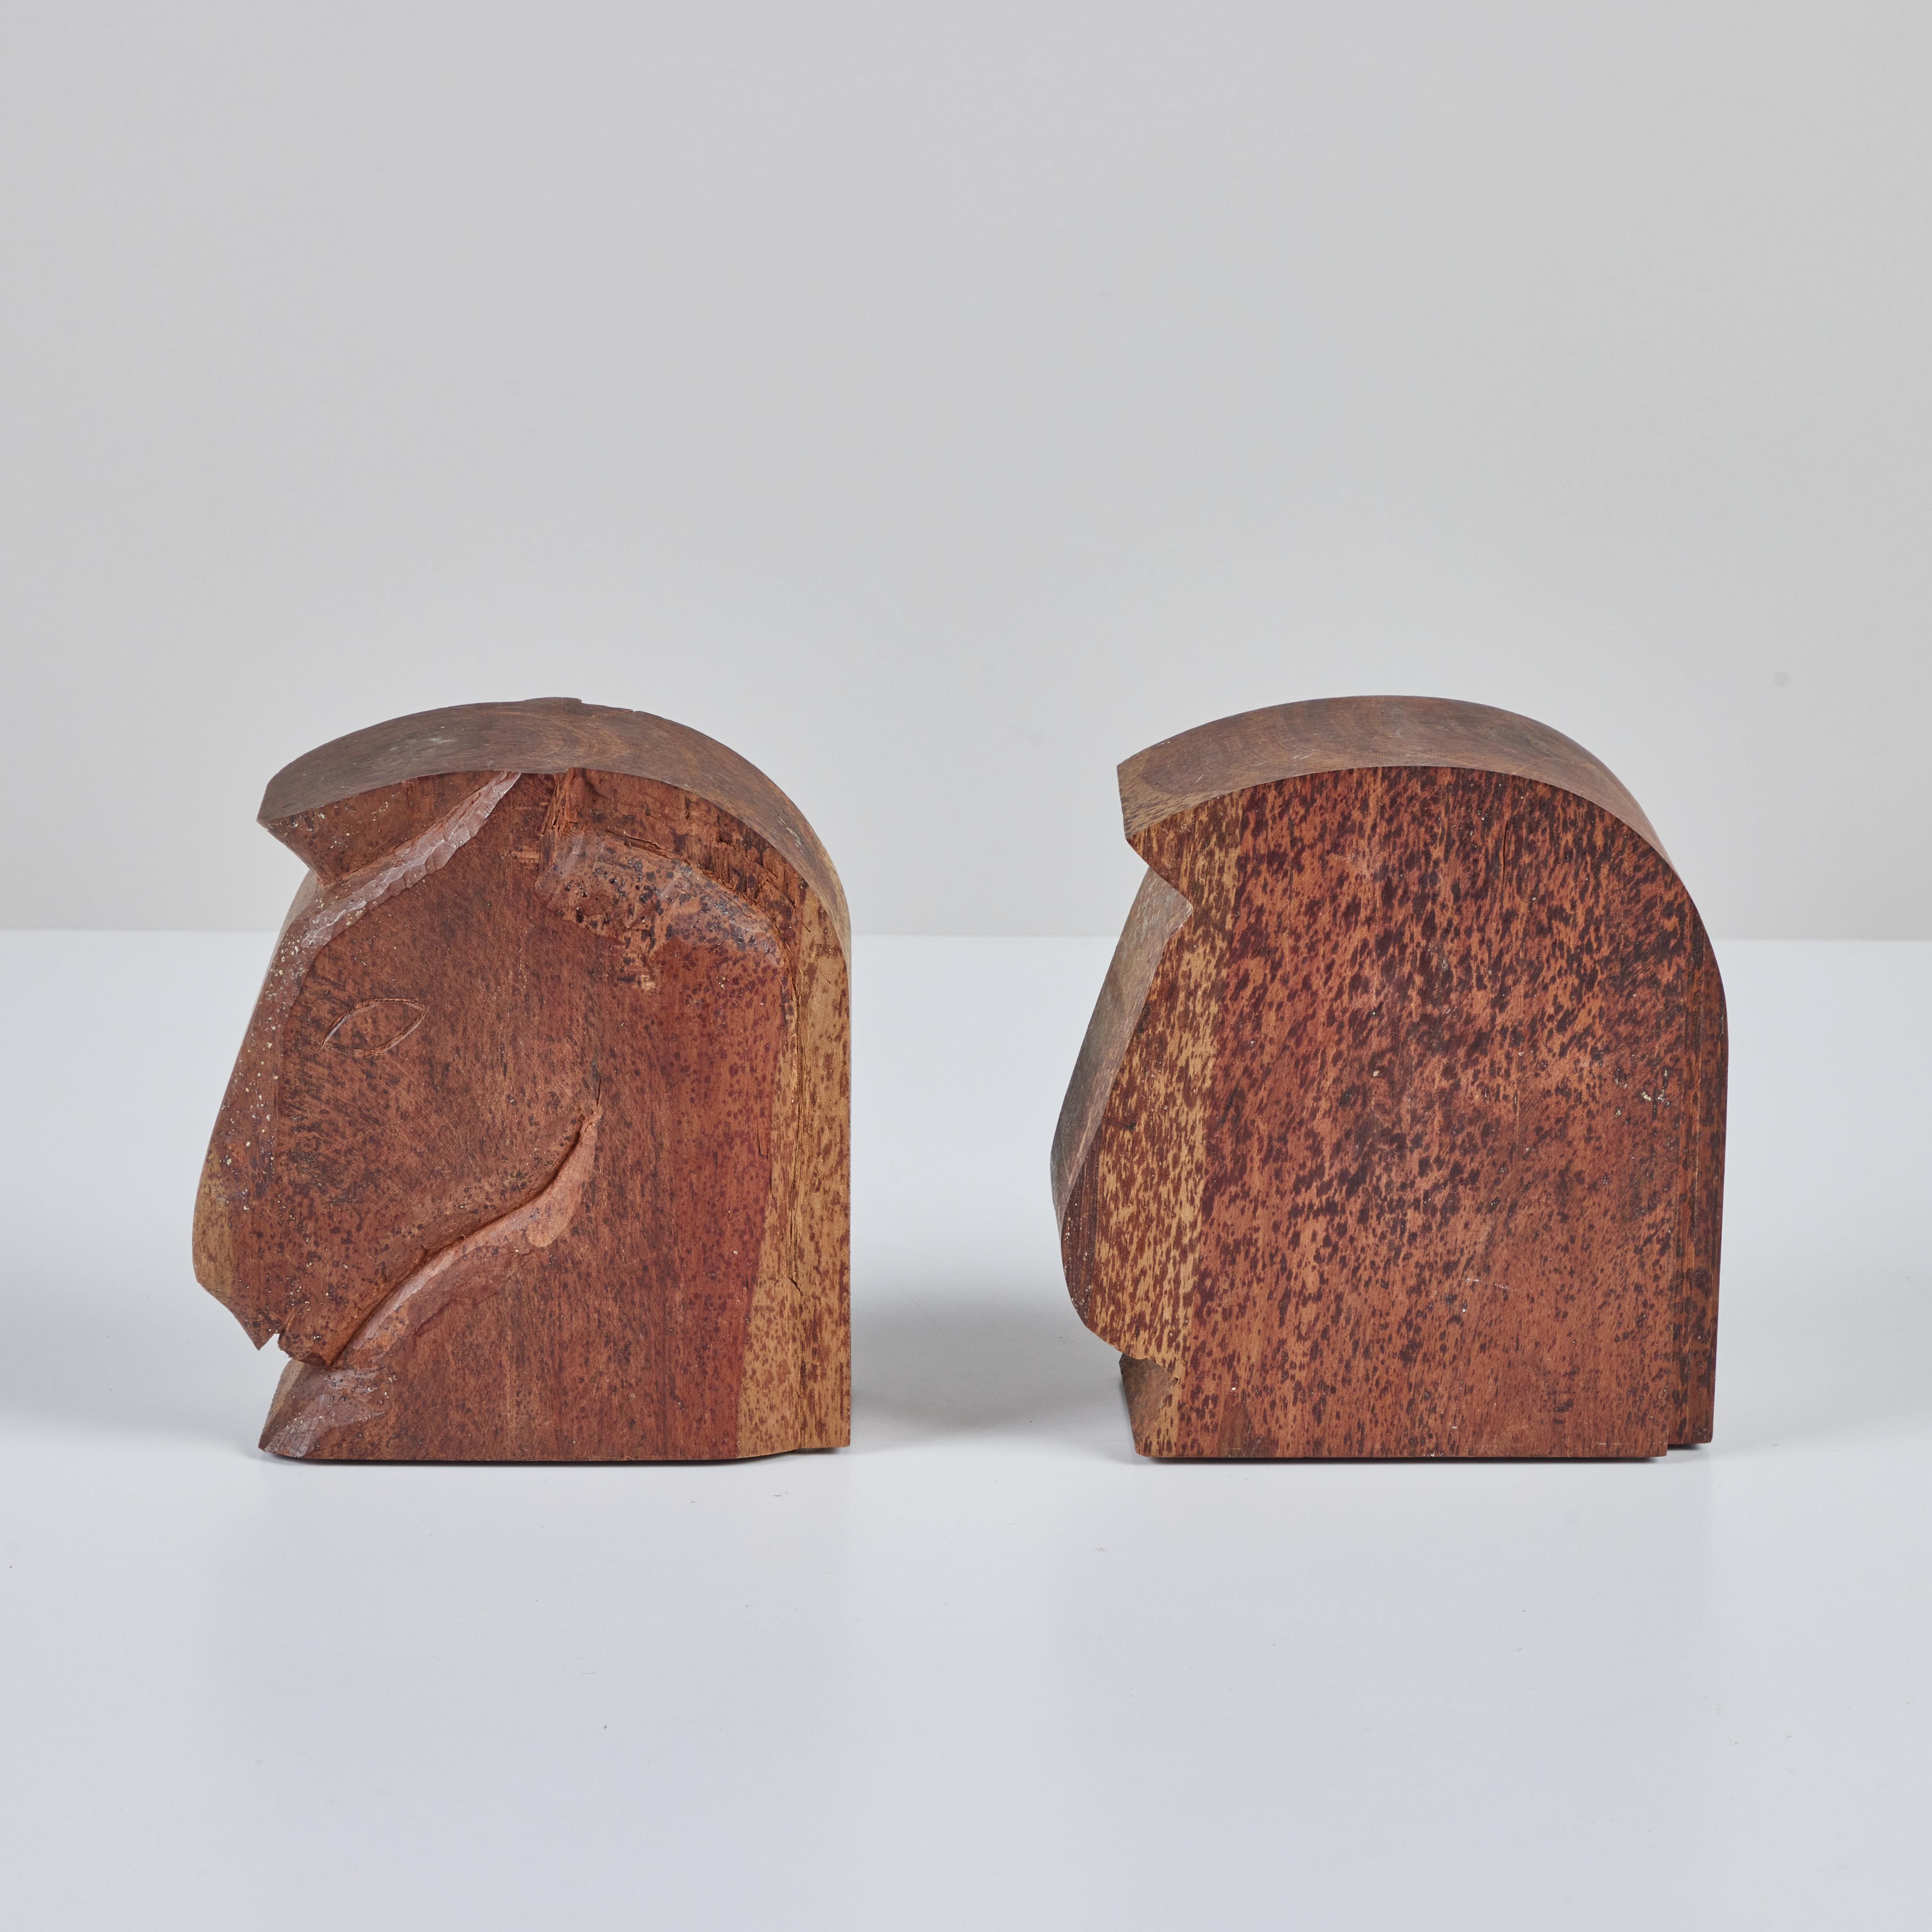 20th Century Pair of Wood Horse Head Bookends